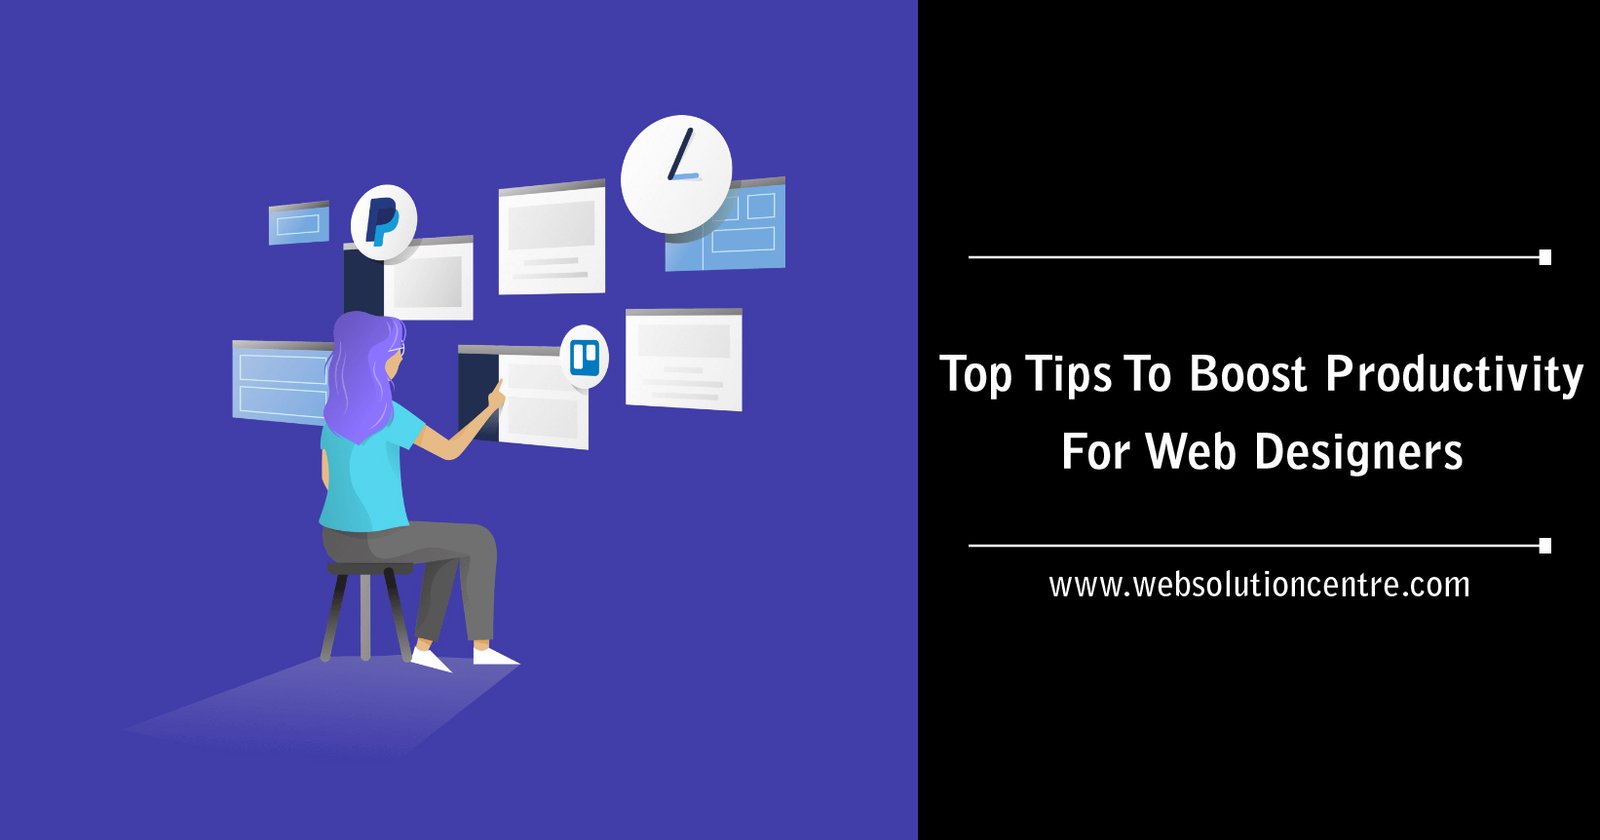 Top Tips To Boost Productivity For Web Designers